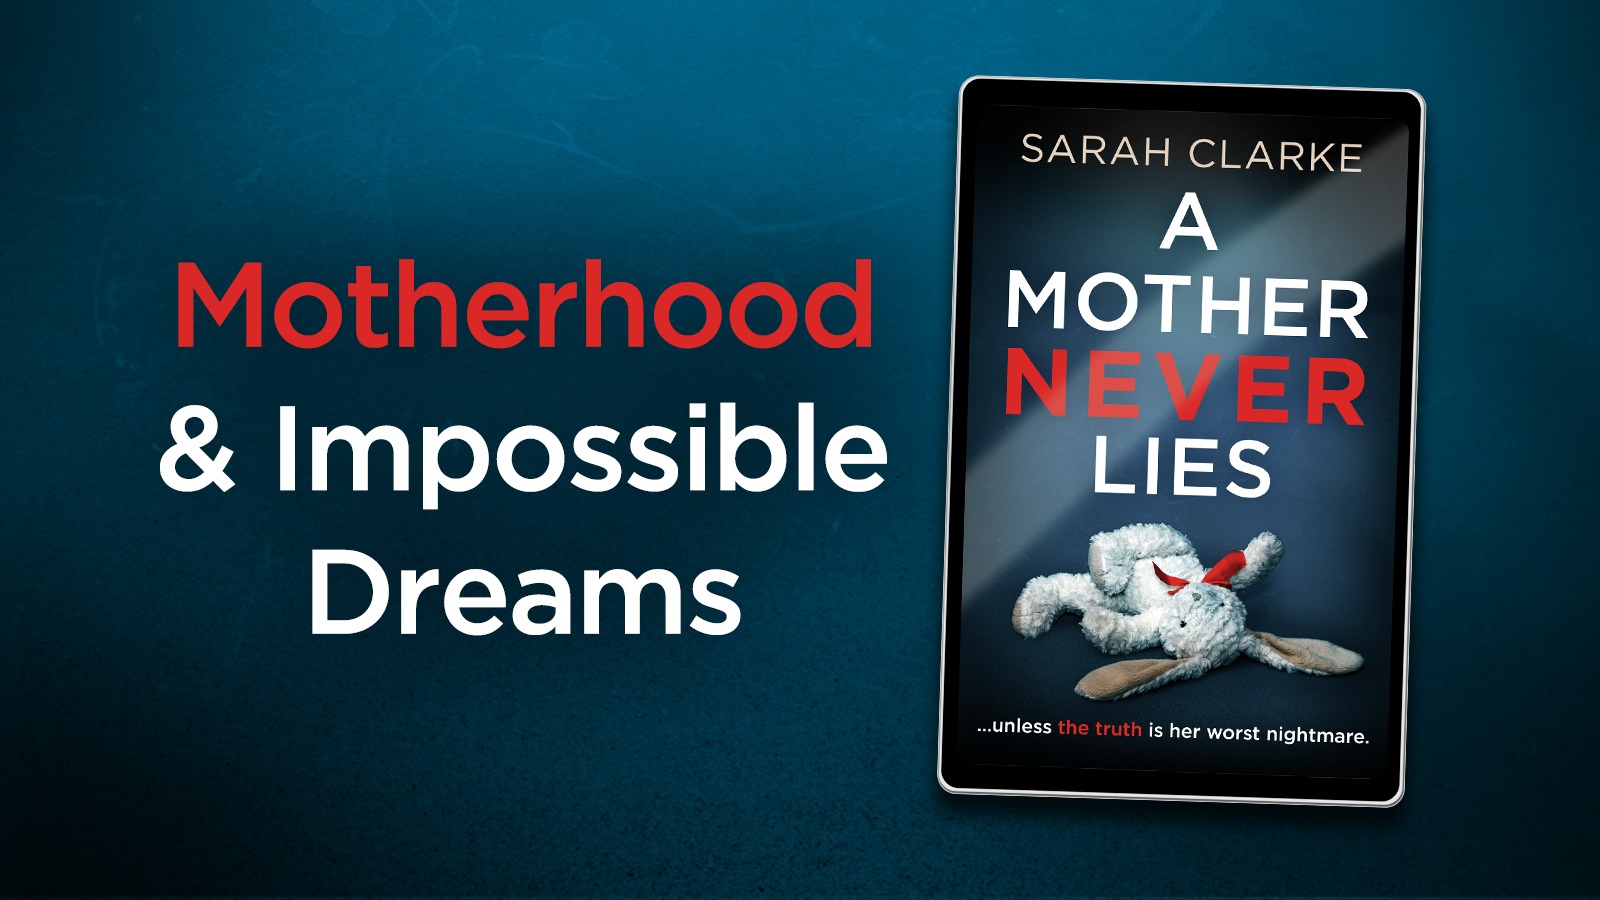 Motherhood and impossible dreams